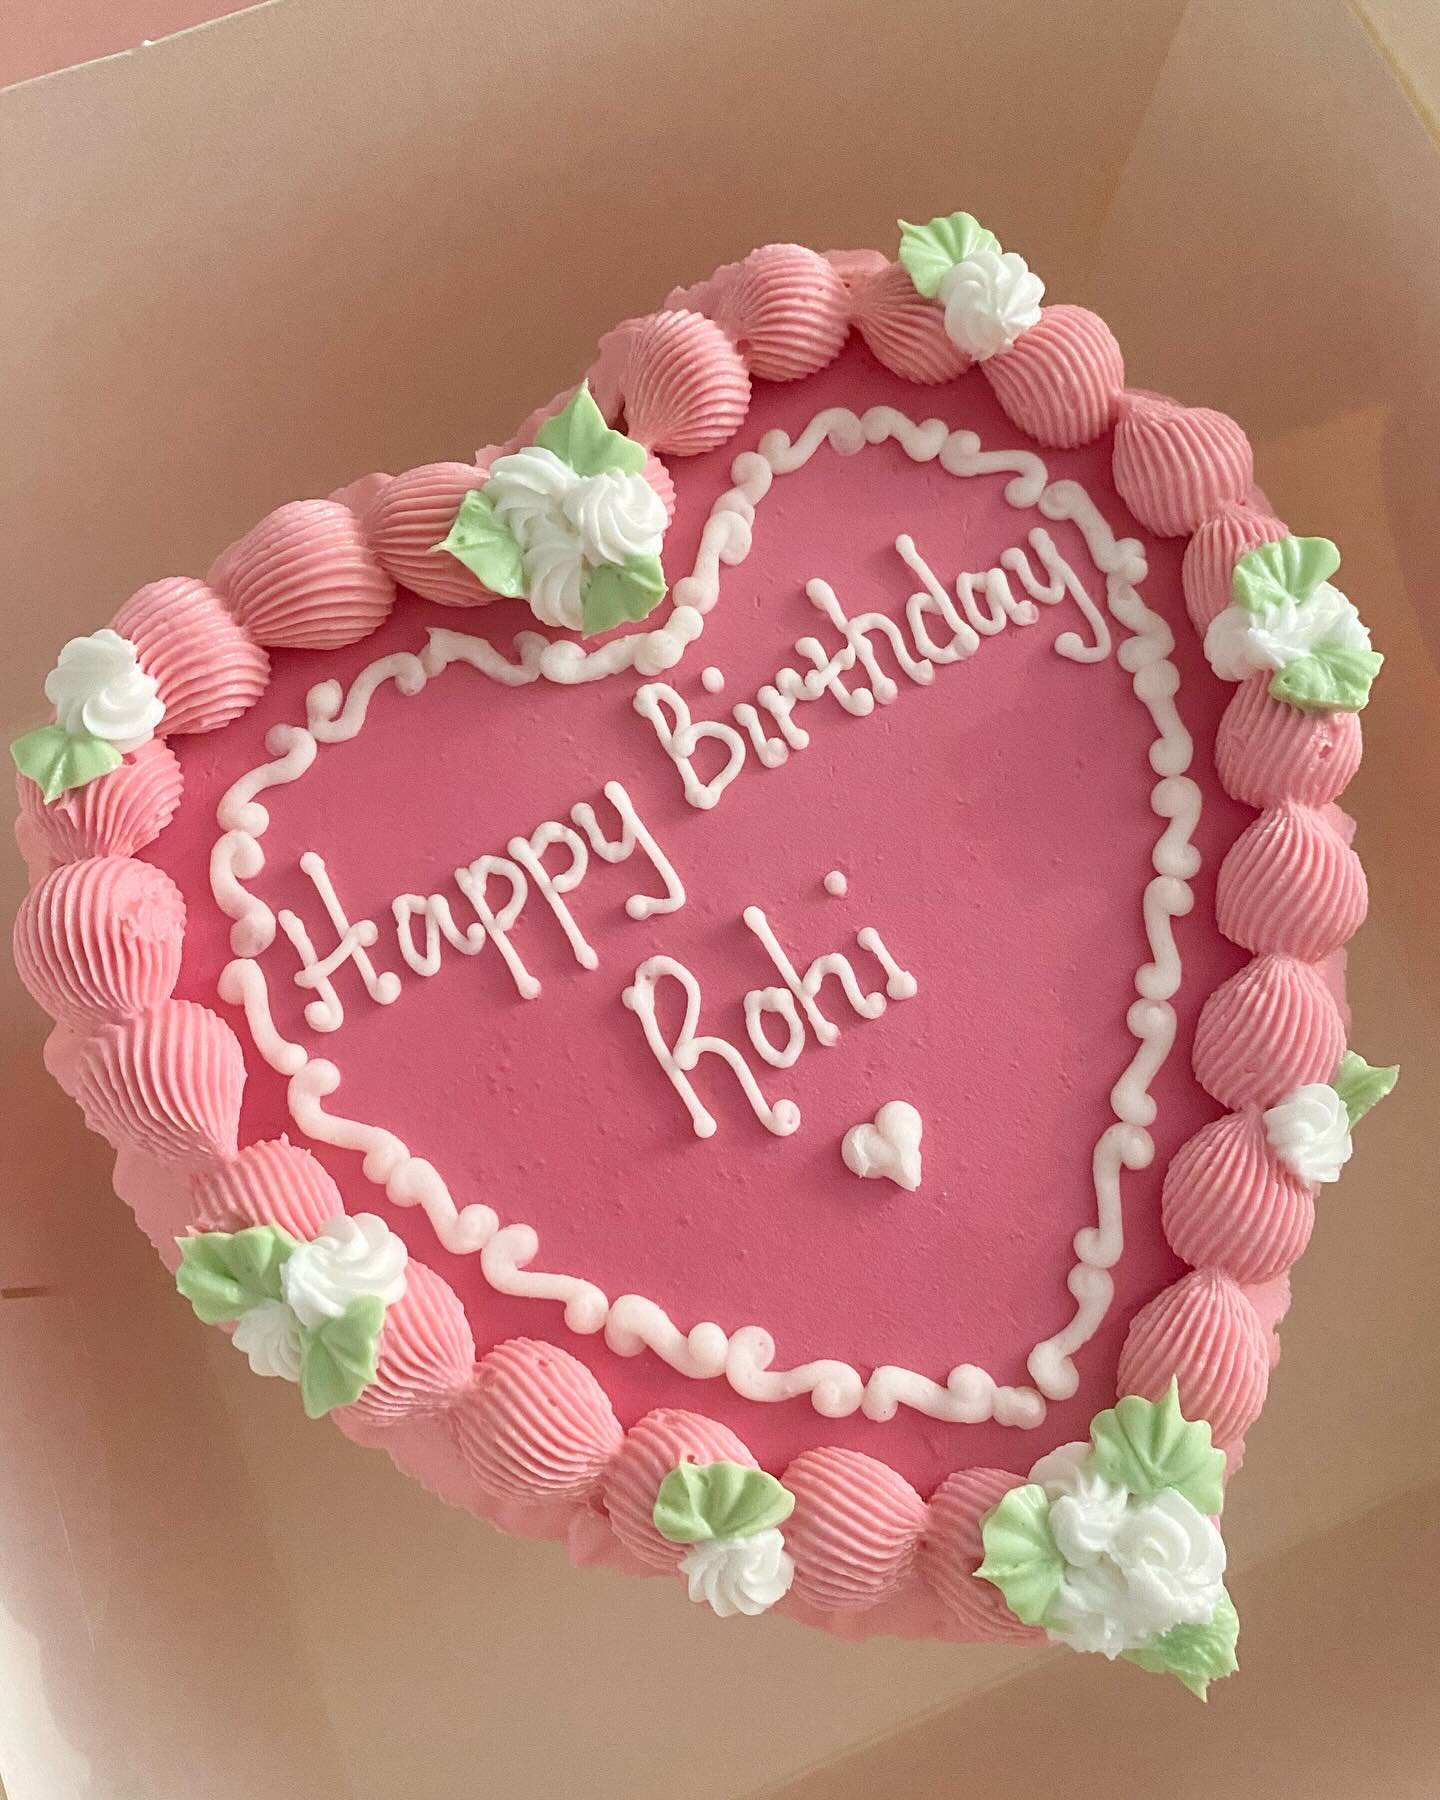 A little afternoon Deee-light!!!! 💓💓💓

For those that know me personally 😍&hellip;this cake has my name all over it! Something I would have for my own party&hellip;.the colours, the details&hellip;..what a gorgeous request by a client! 🌸🌸🌸